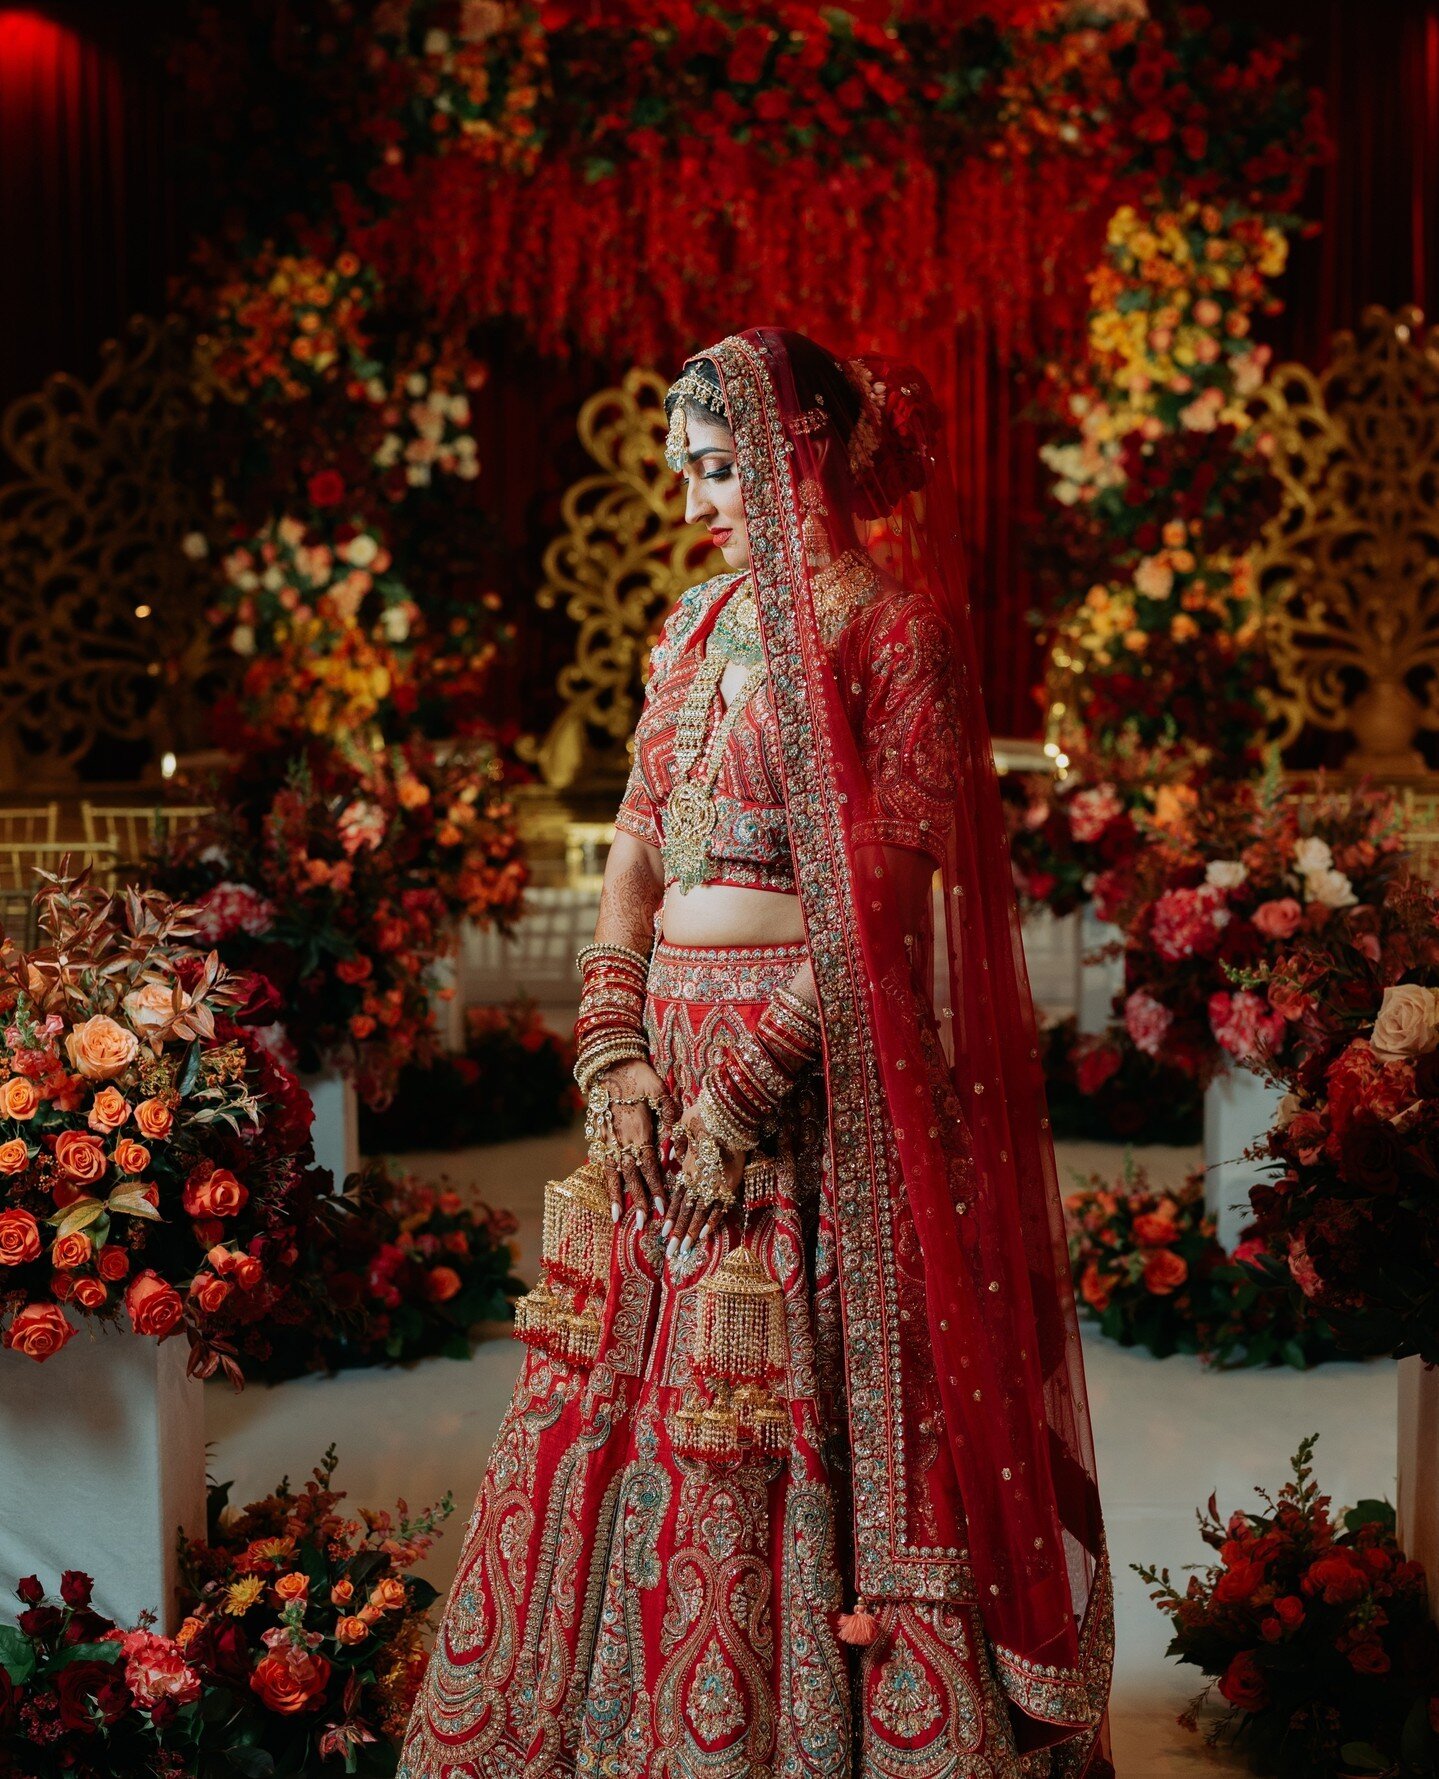 Red has always been the boss when it comes to Indian weddings, and I'm absolutely loving every vibrant moment of it! 💃❤️ From the rich hues to the intricate details, this color just screams tradition and celebration.⁠
⁠
⁠
#indianwedding #desiwedding